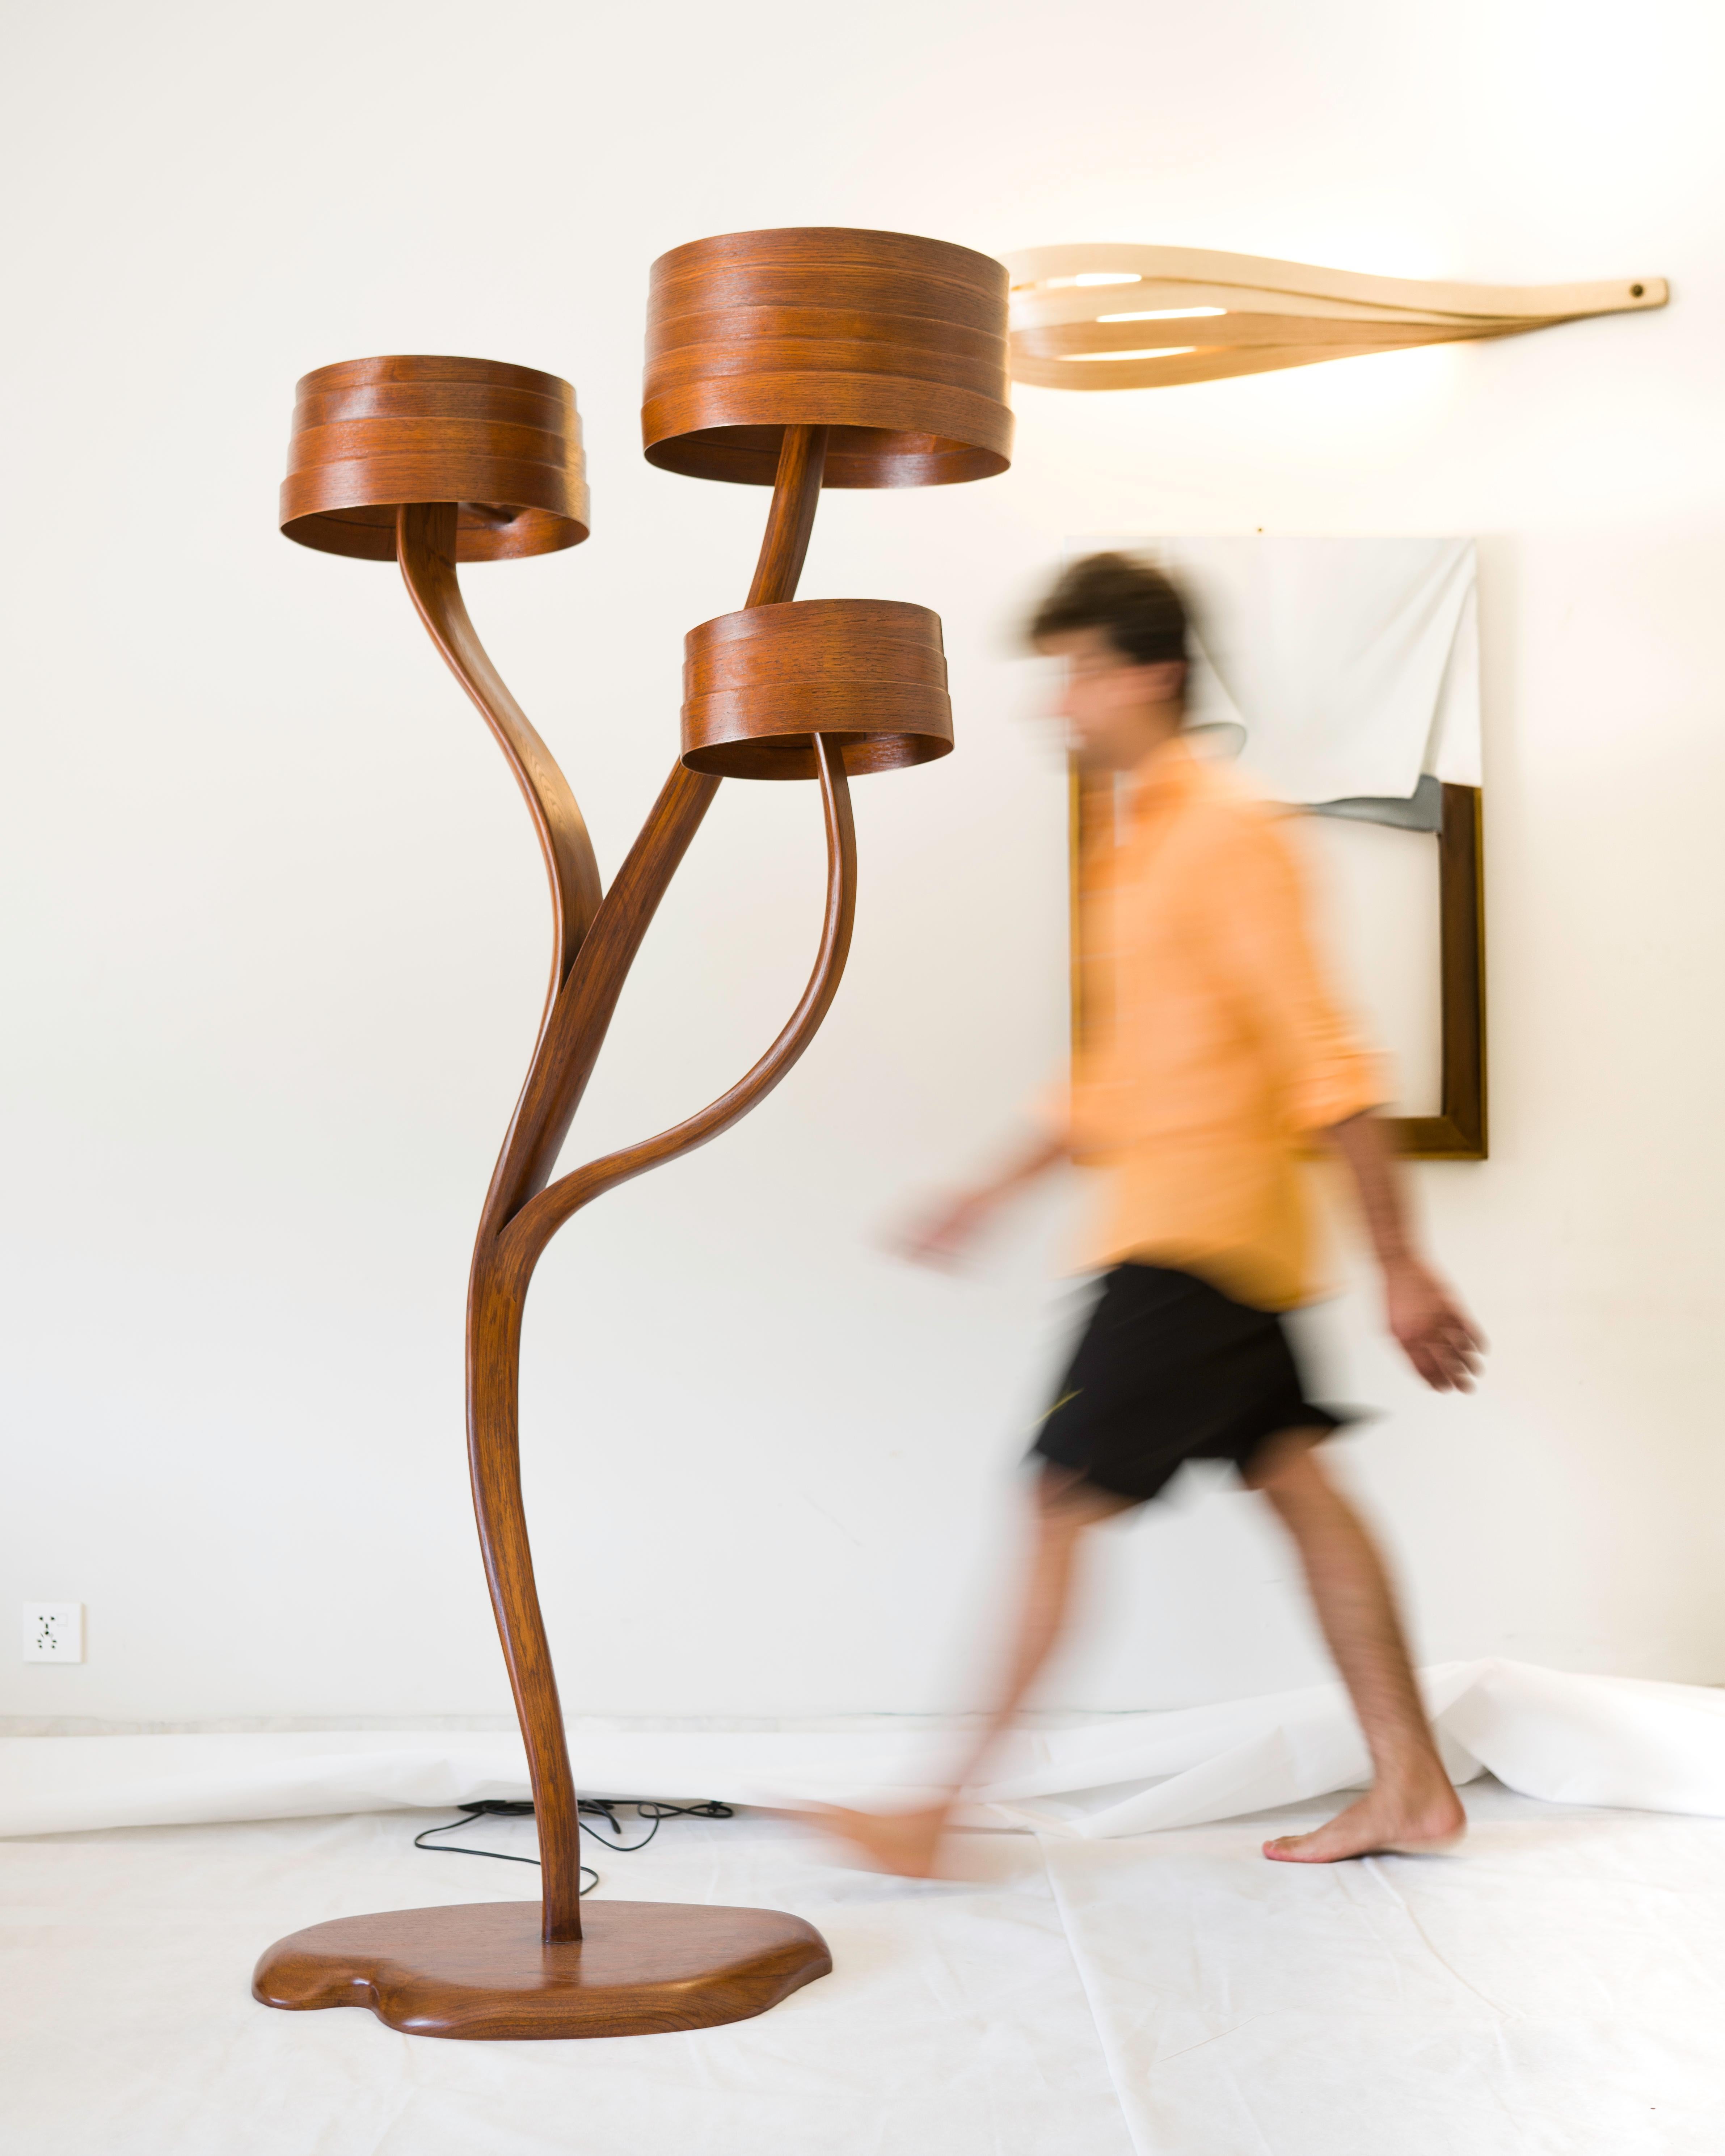 A lighting piece crafted by hand; the piece stems from the base and flows to have three lighting sources, at different levels. All of the lamp shades are different from the other in size; which illuminate the piece and the space around it in a